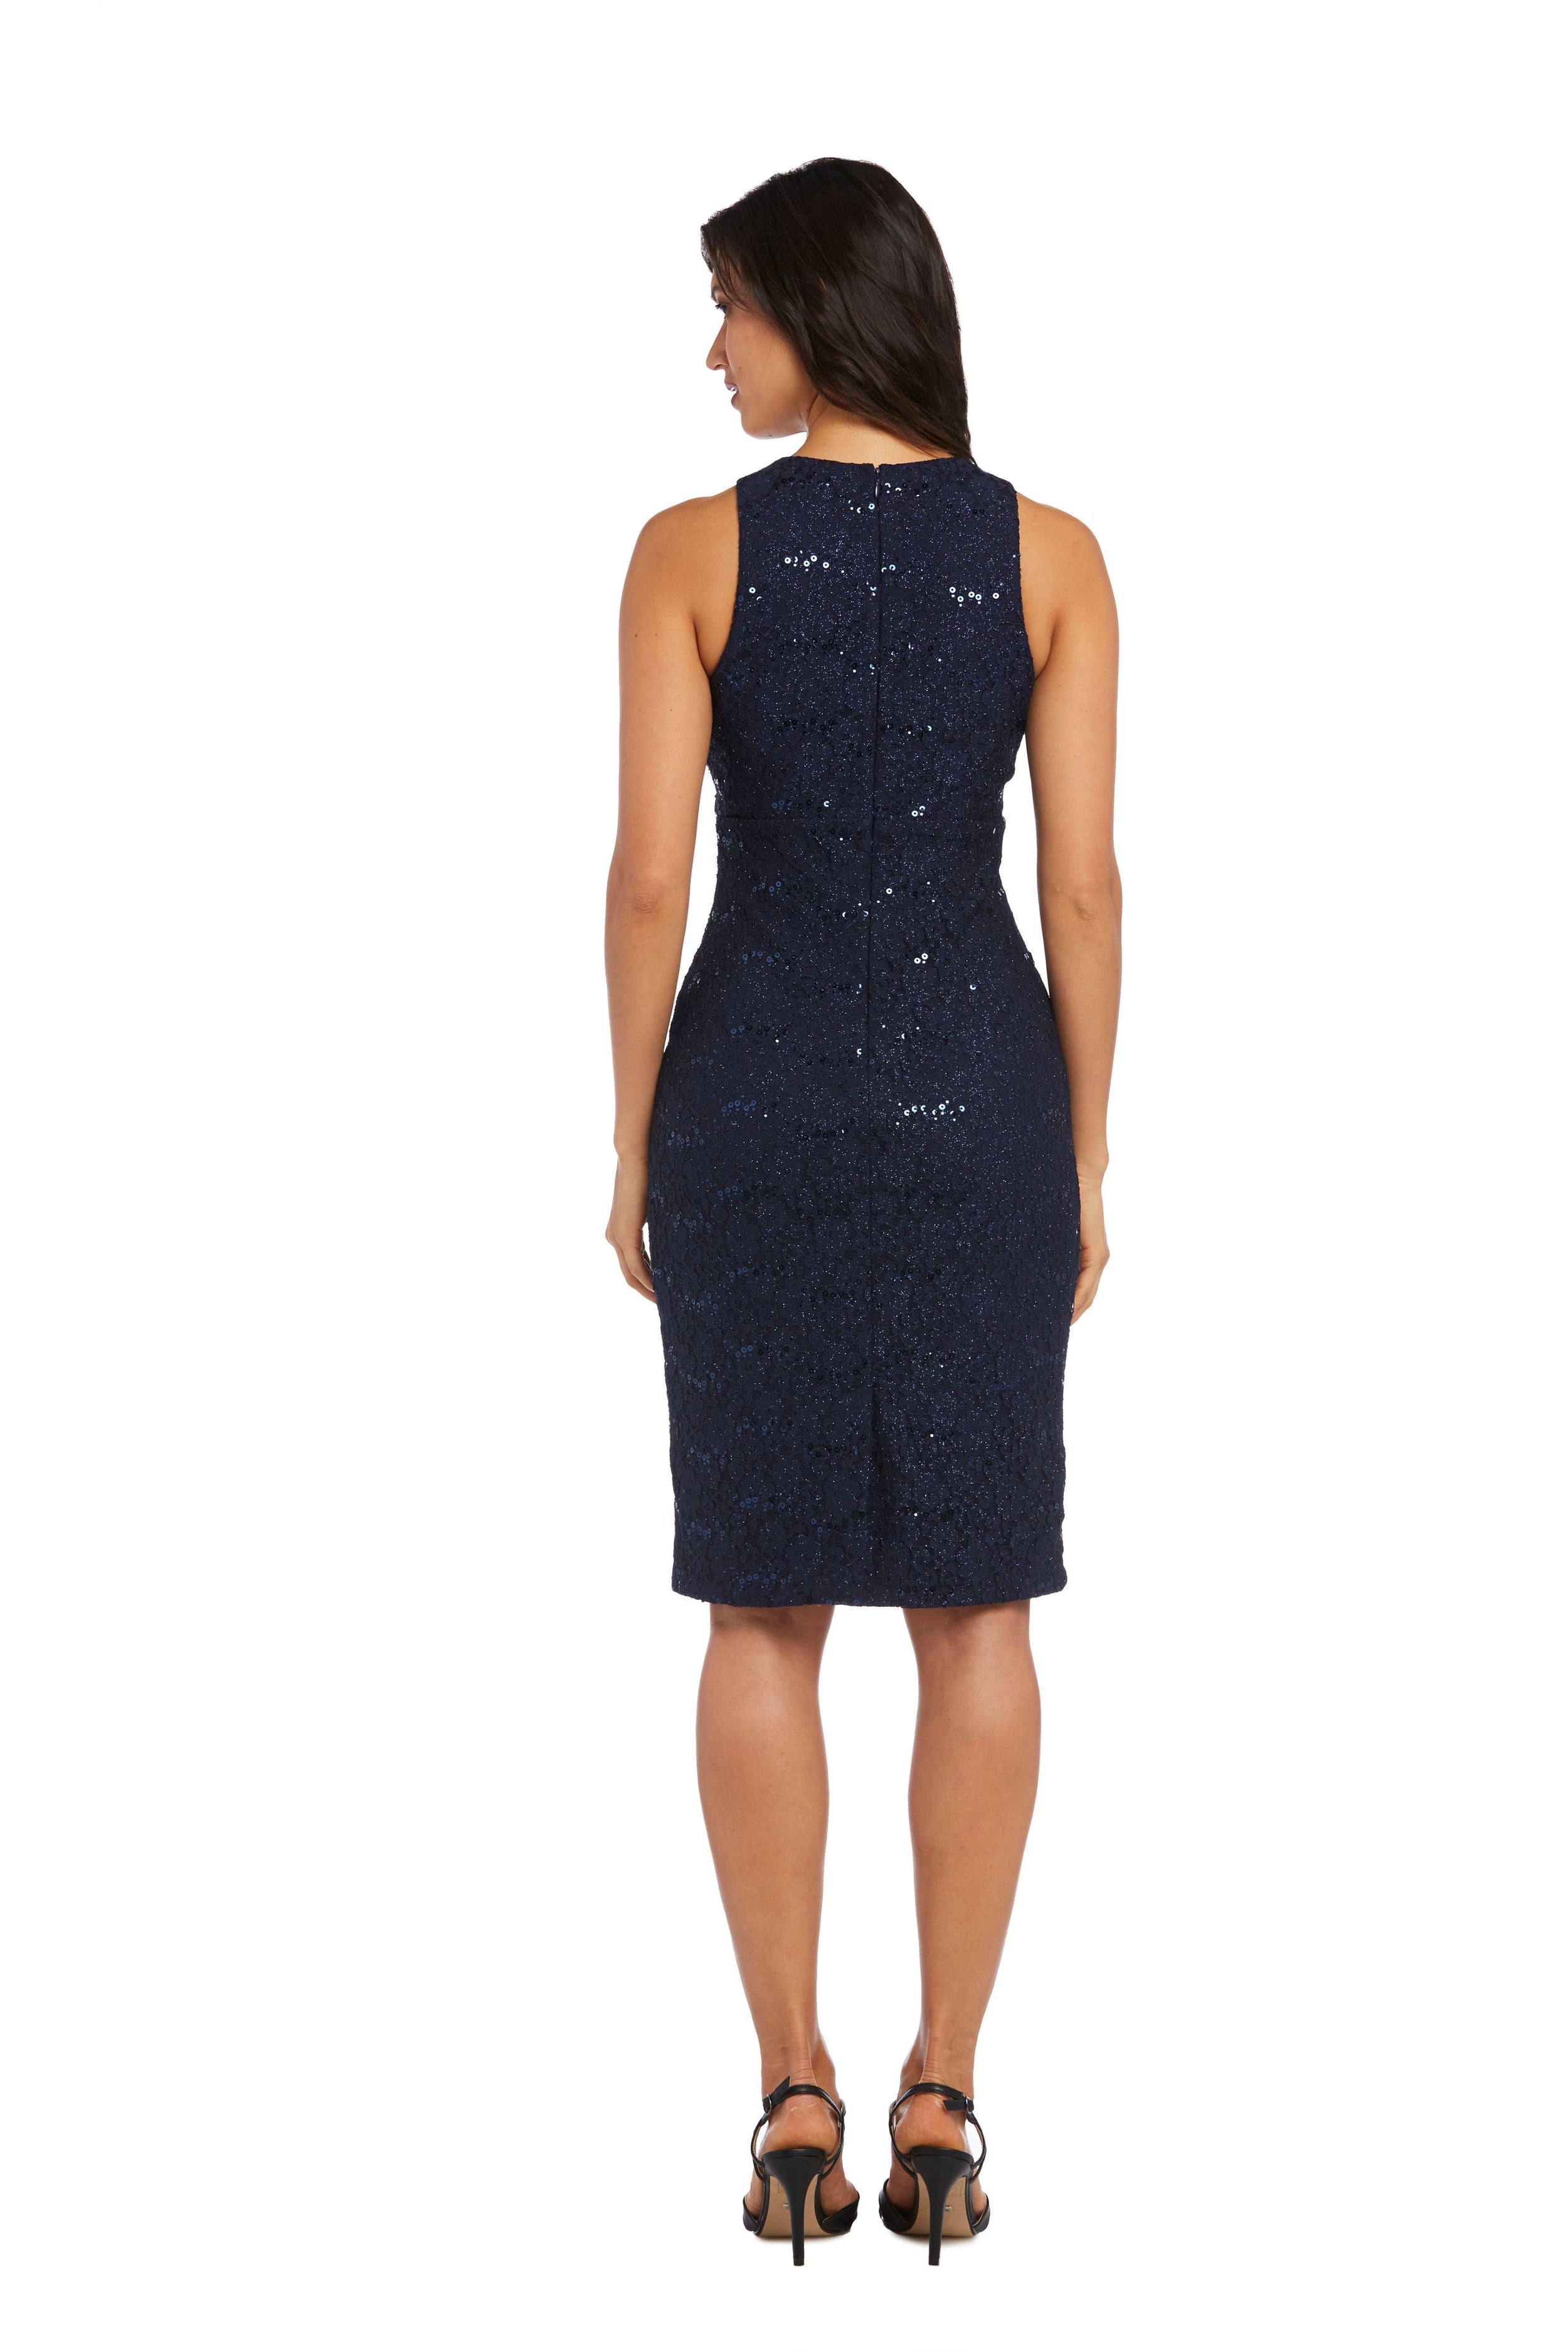 Nightway Short Fitted Cocktail Dress 21500 - The Dress Outlet